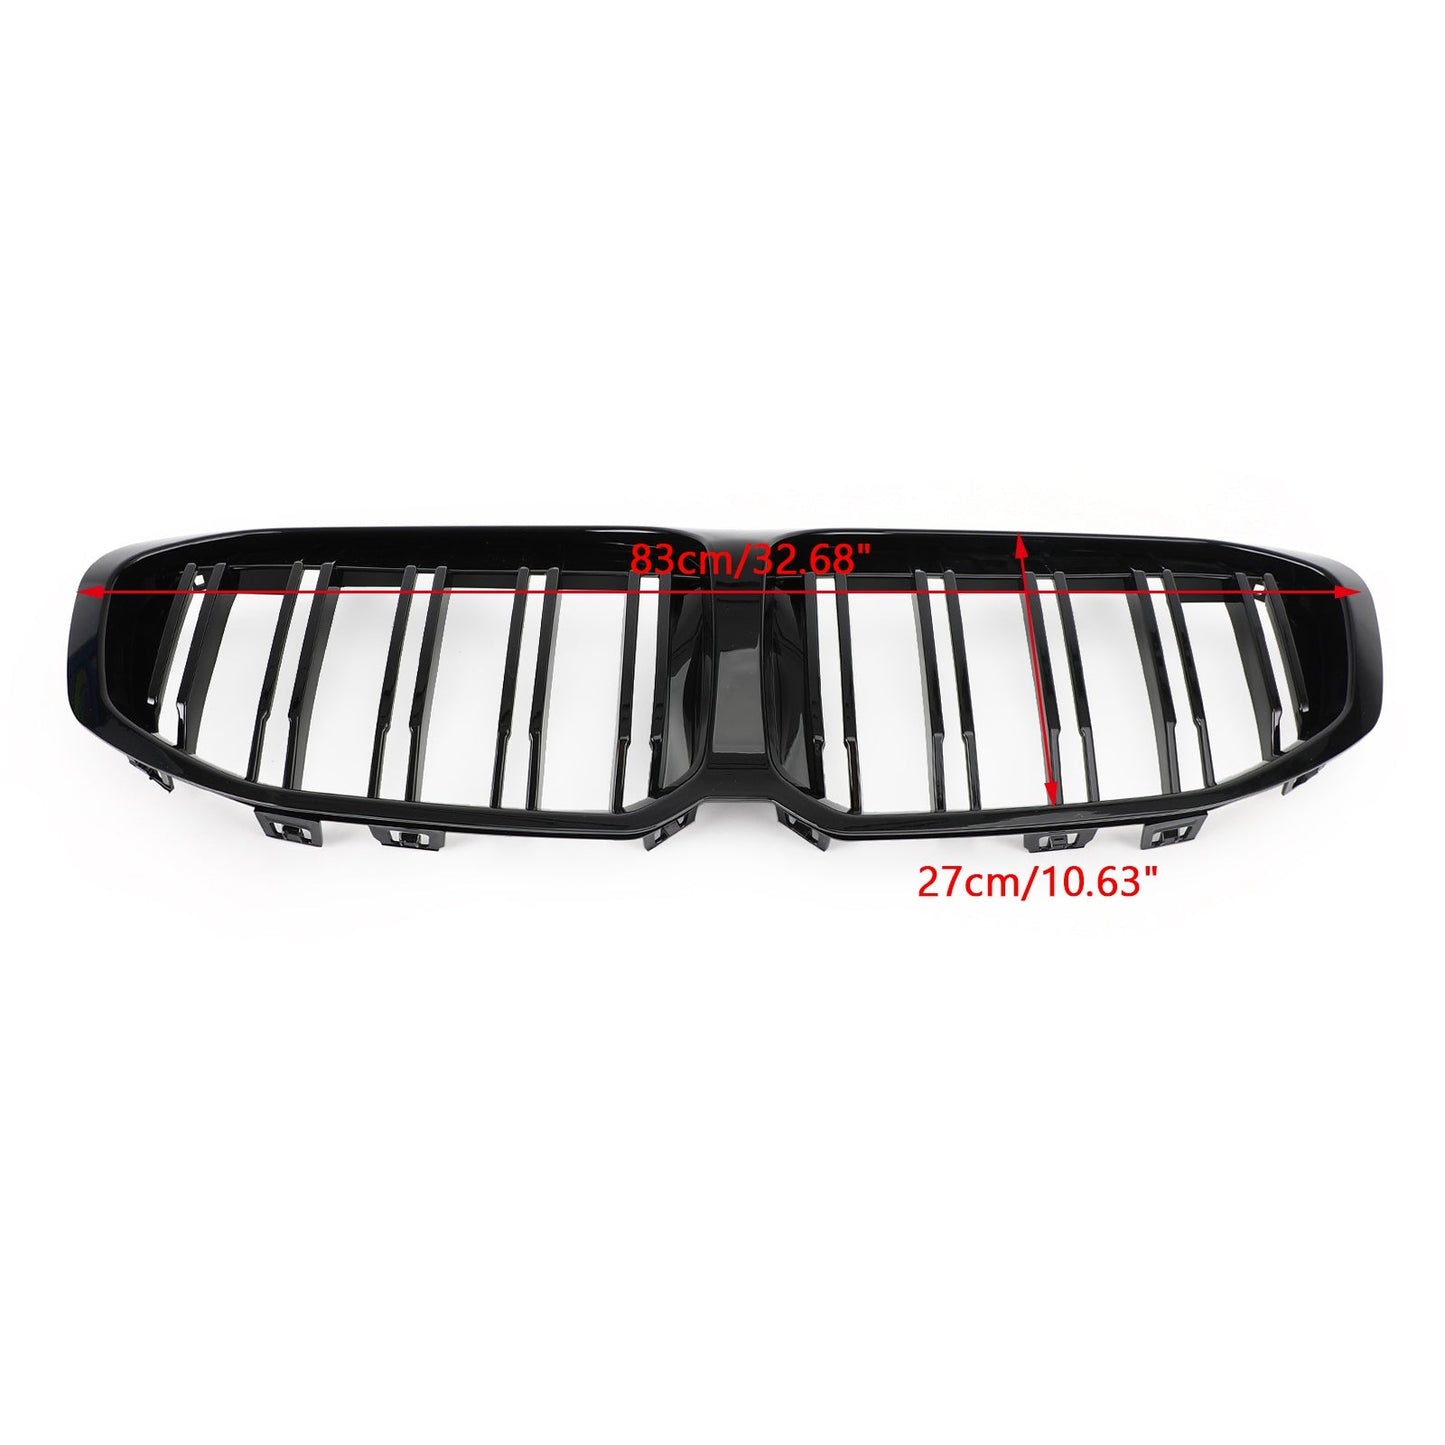 Gloss Double Black Front Replacement Hood Grille Fit BMW F40 1-Series 2019-2021